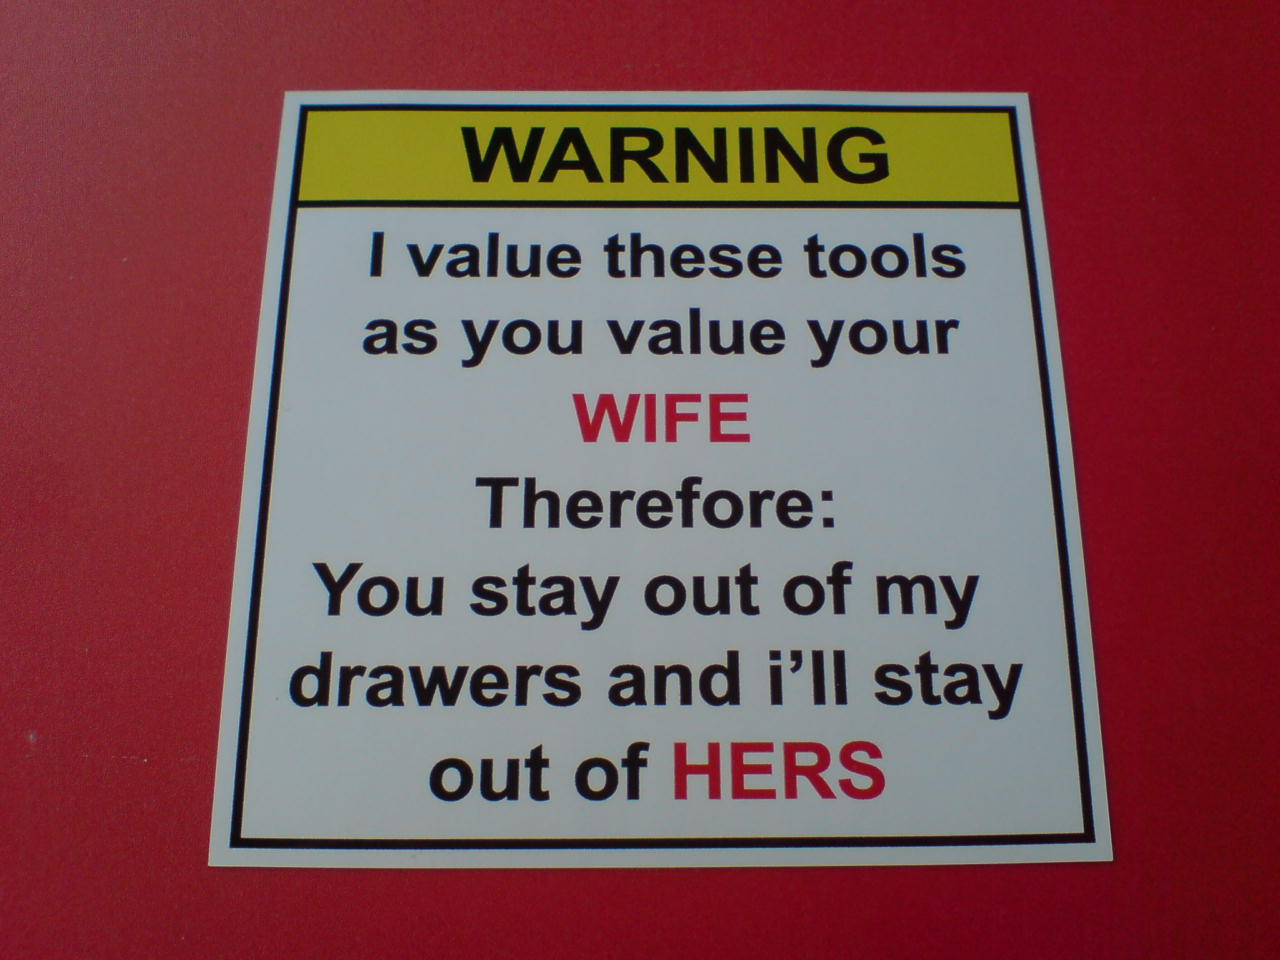 WARNING I VALUE THESE TOOLS STICKER. Warning in black lettering on a yellow banner. I value these tools as you value your wife. Therefore: You stay out of my drawers and I'll stay out of hers. Text is black. Wife and Hers is highlighted in red.